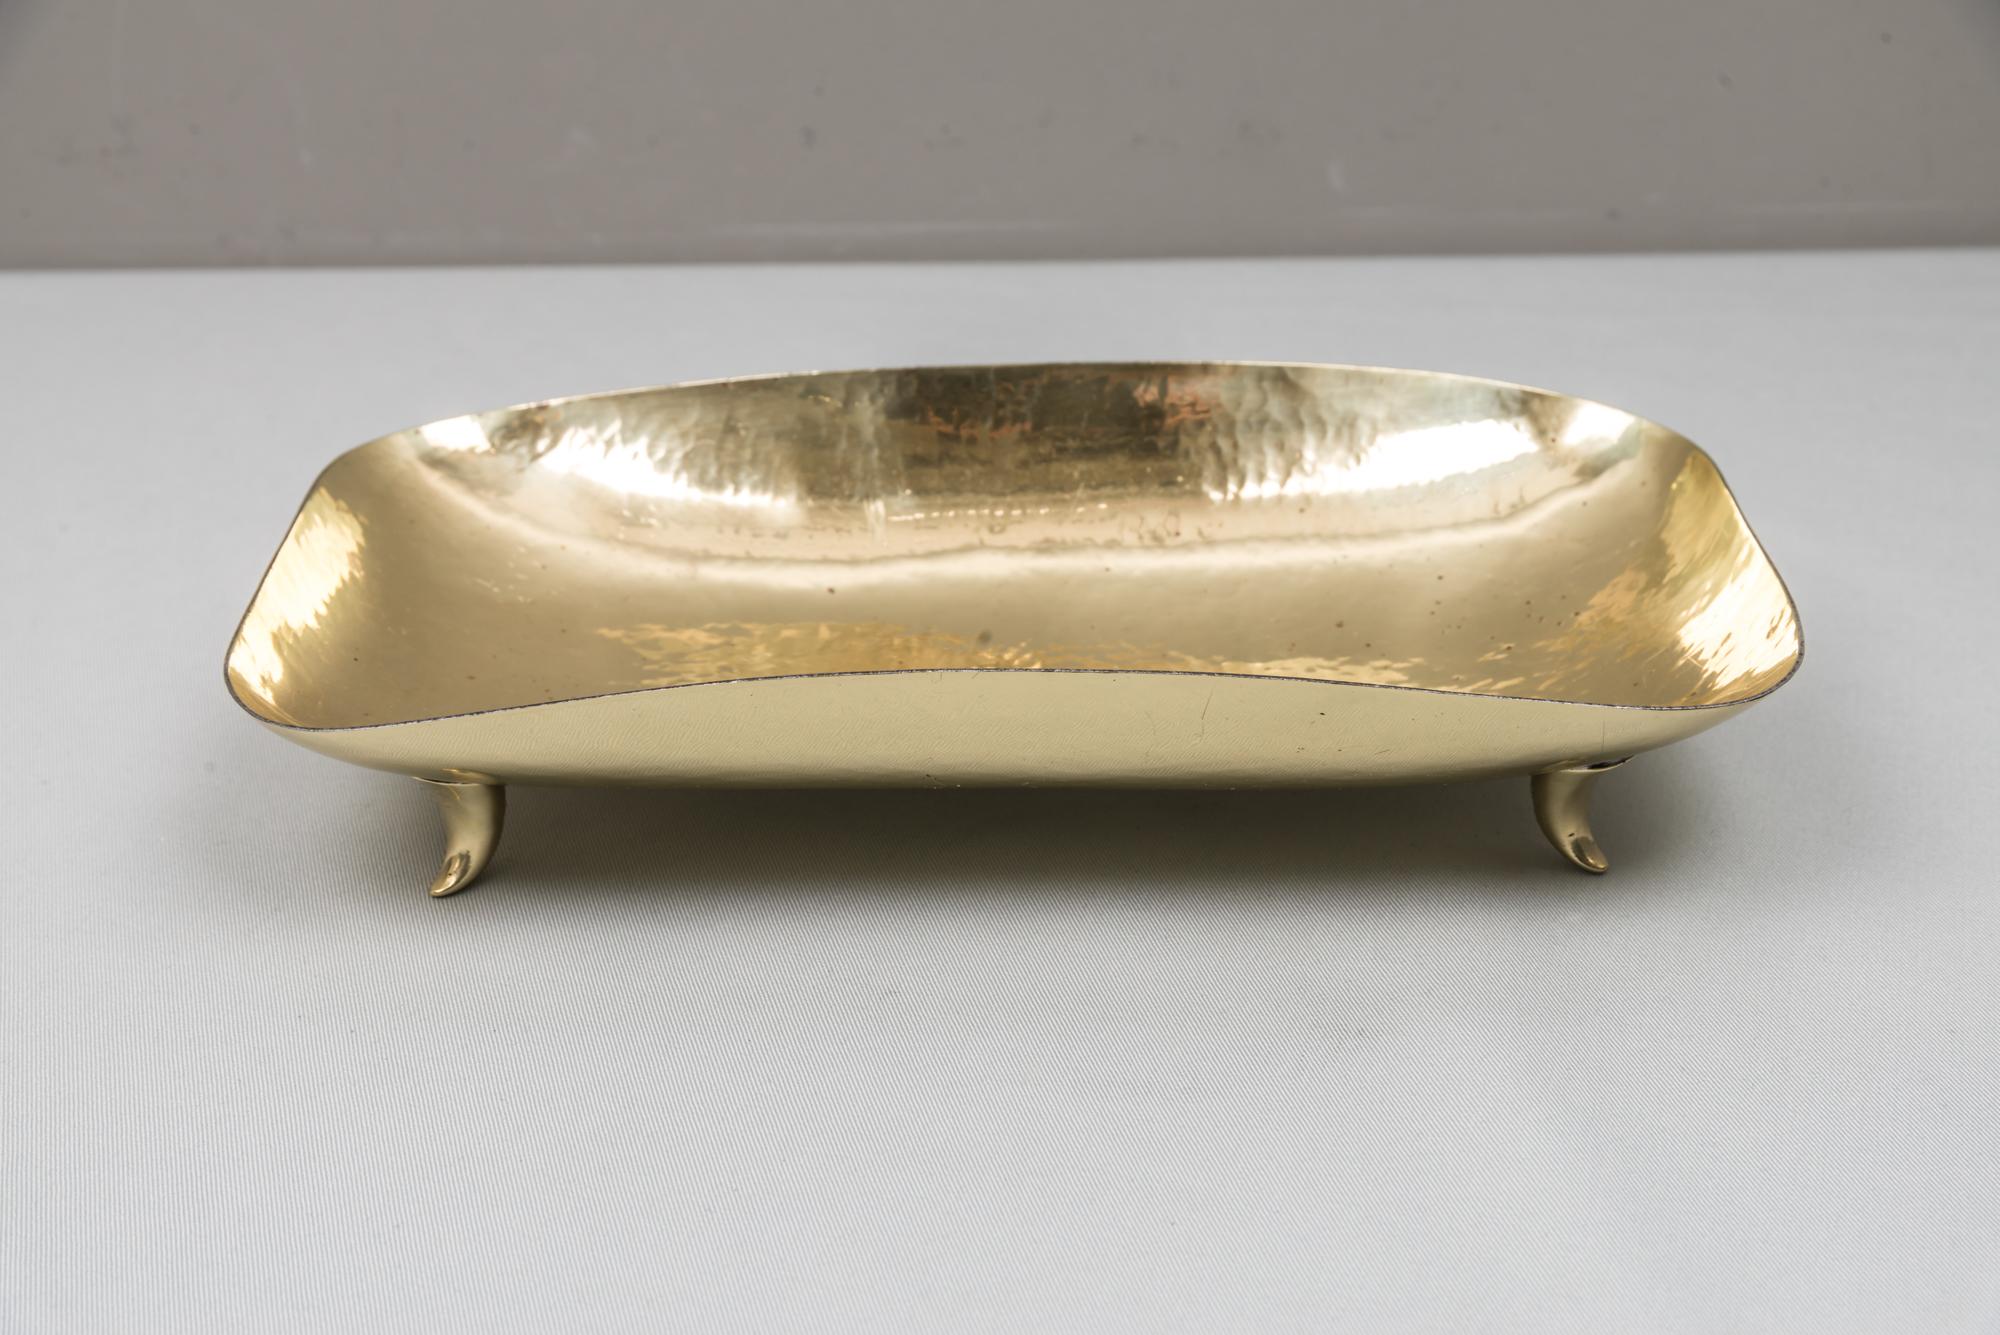 Karl Hagenauer bowl, circa 1950s
Signed on bottom (see last picture)
Iron (brass-plated)
Polished and stove enameled.